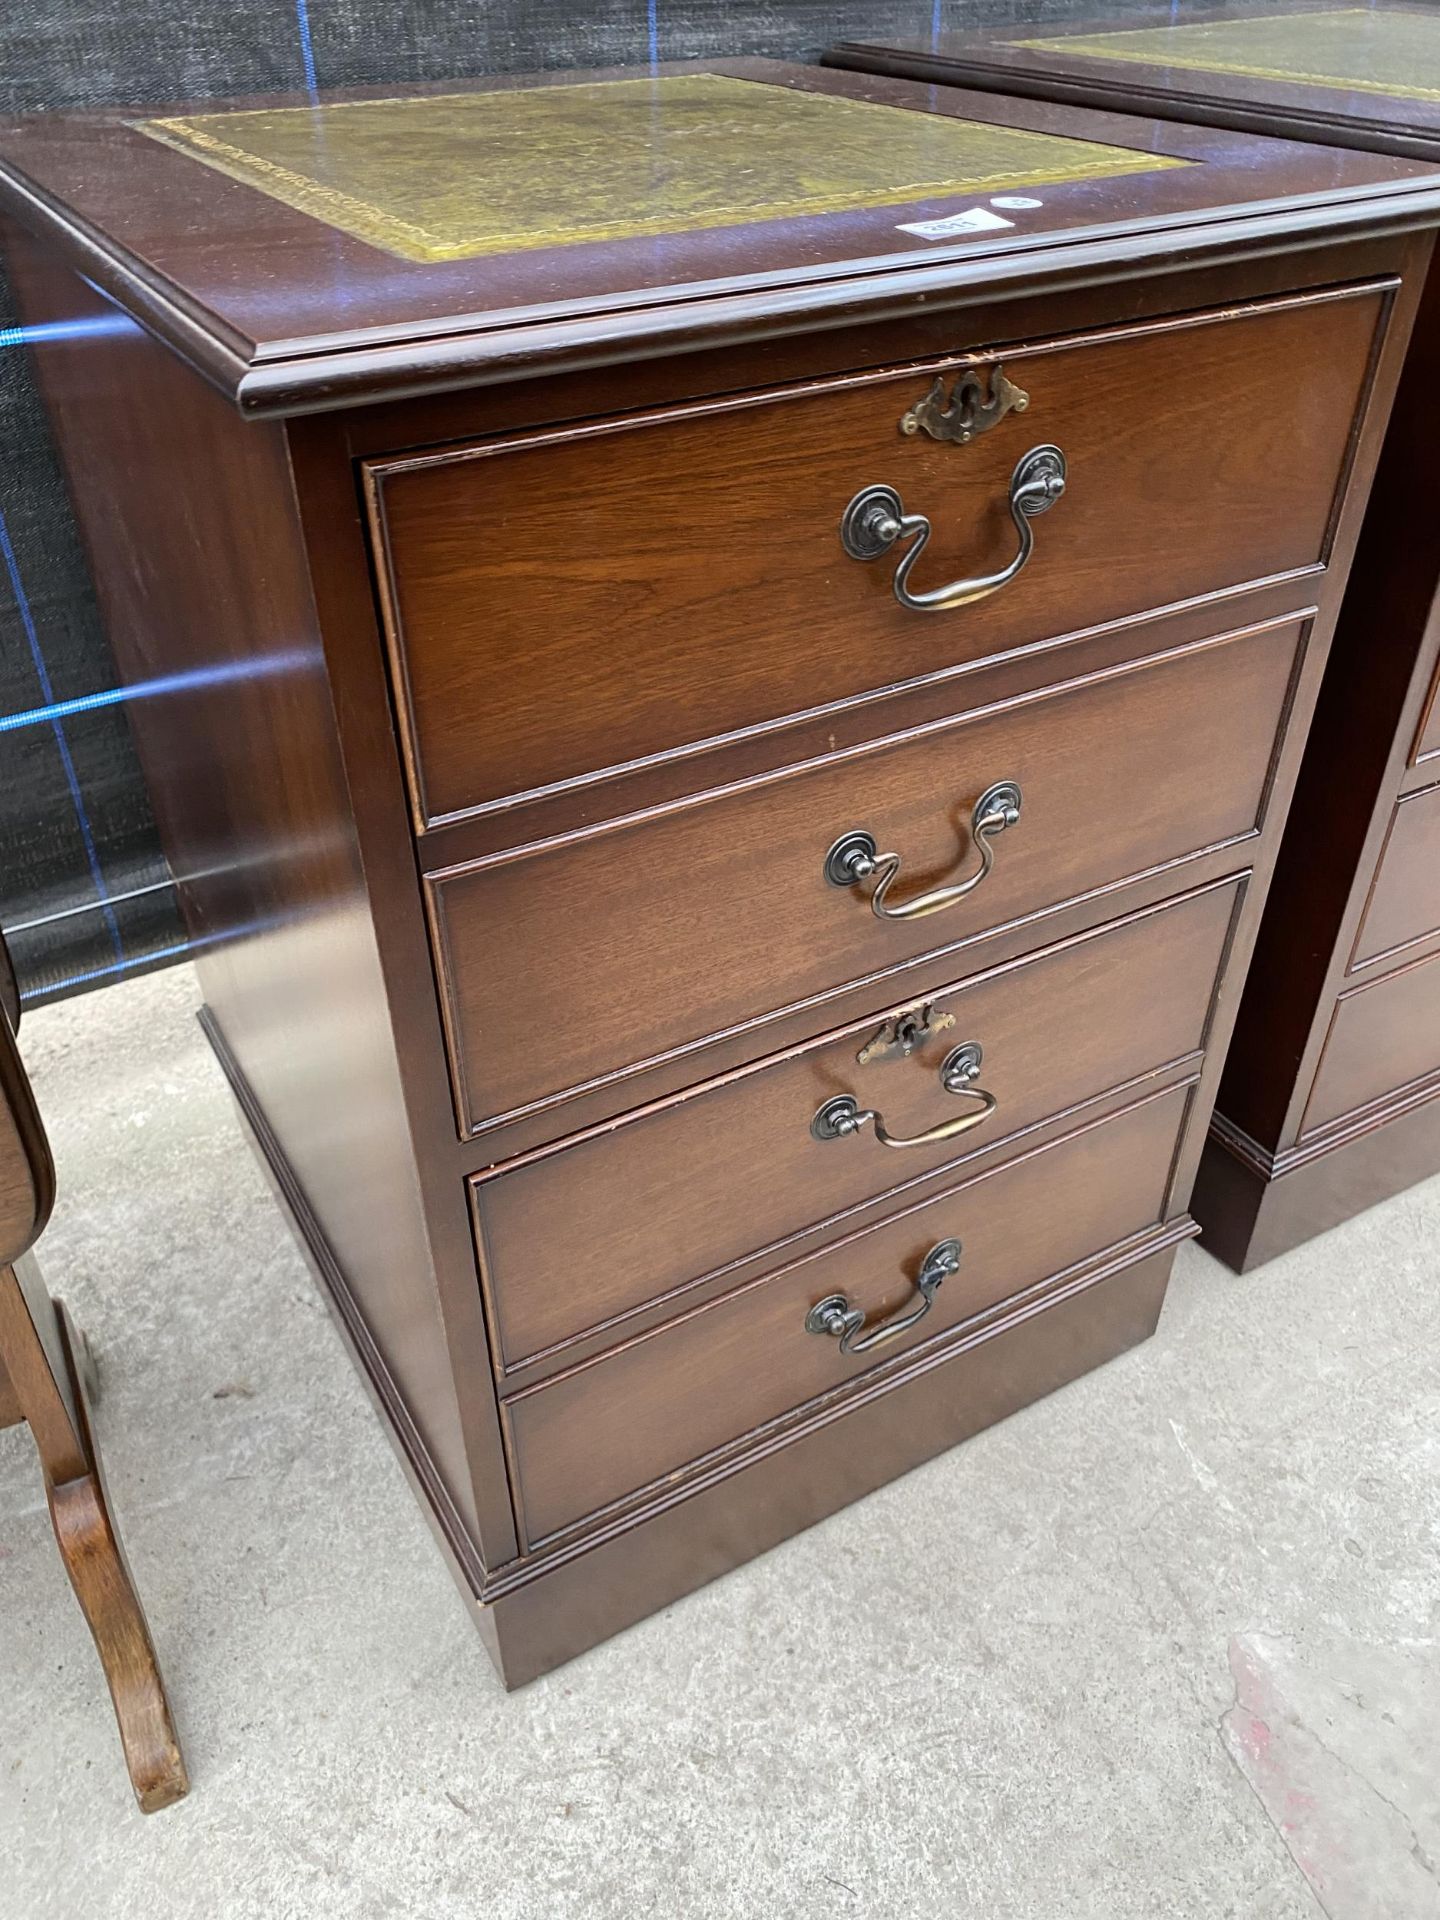 A MAHOGANY TWO DRAWER FILING CABINET WITH INSET LEATHER TOP - Image 2 of 3